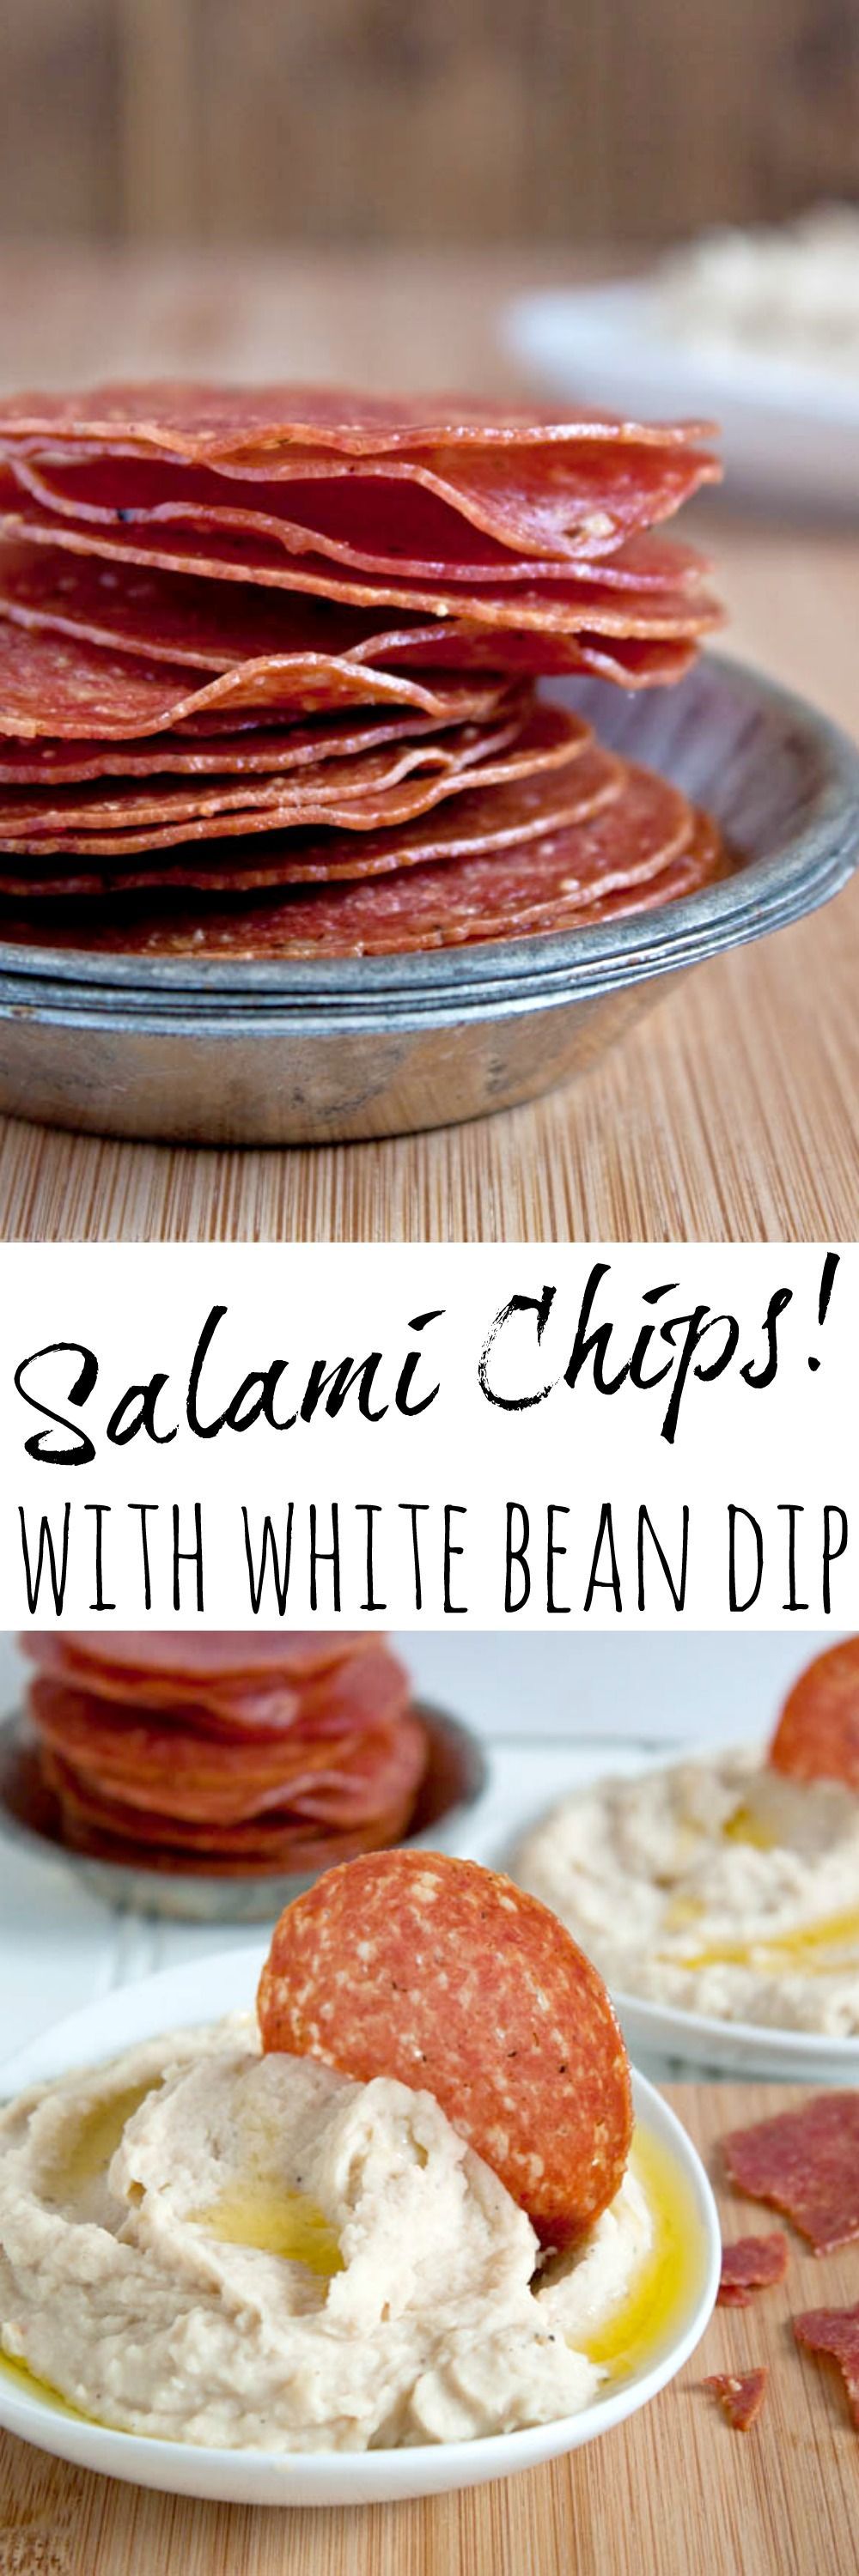 Crispy salami chips (one-ingredient!) with white bean dip. Super bowl appetizer extreme!